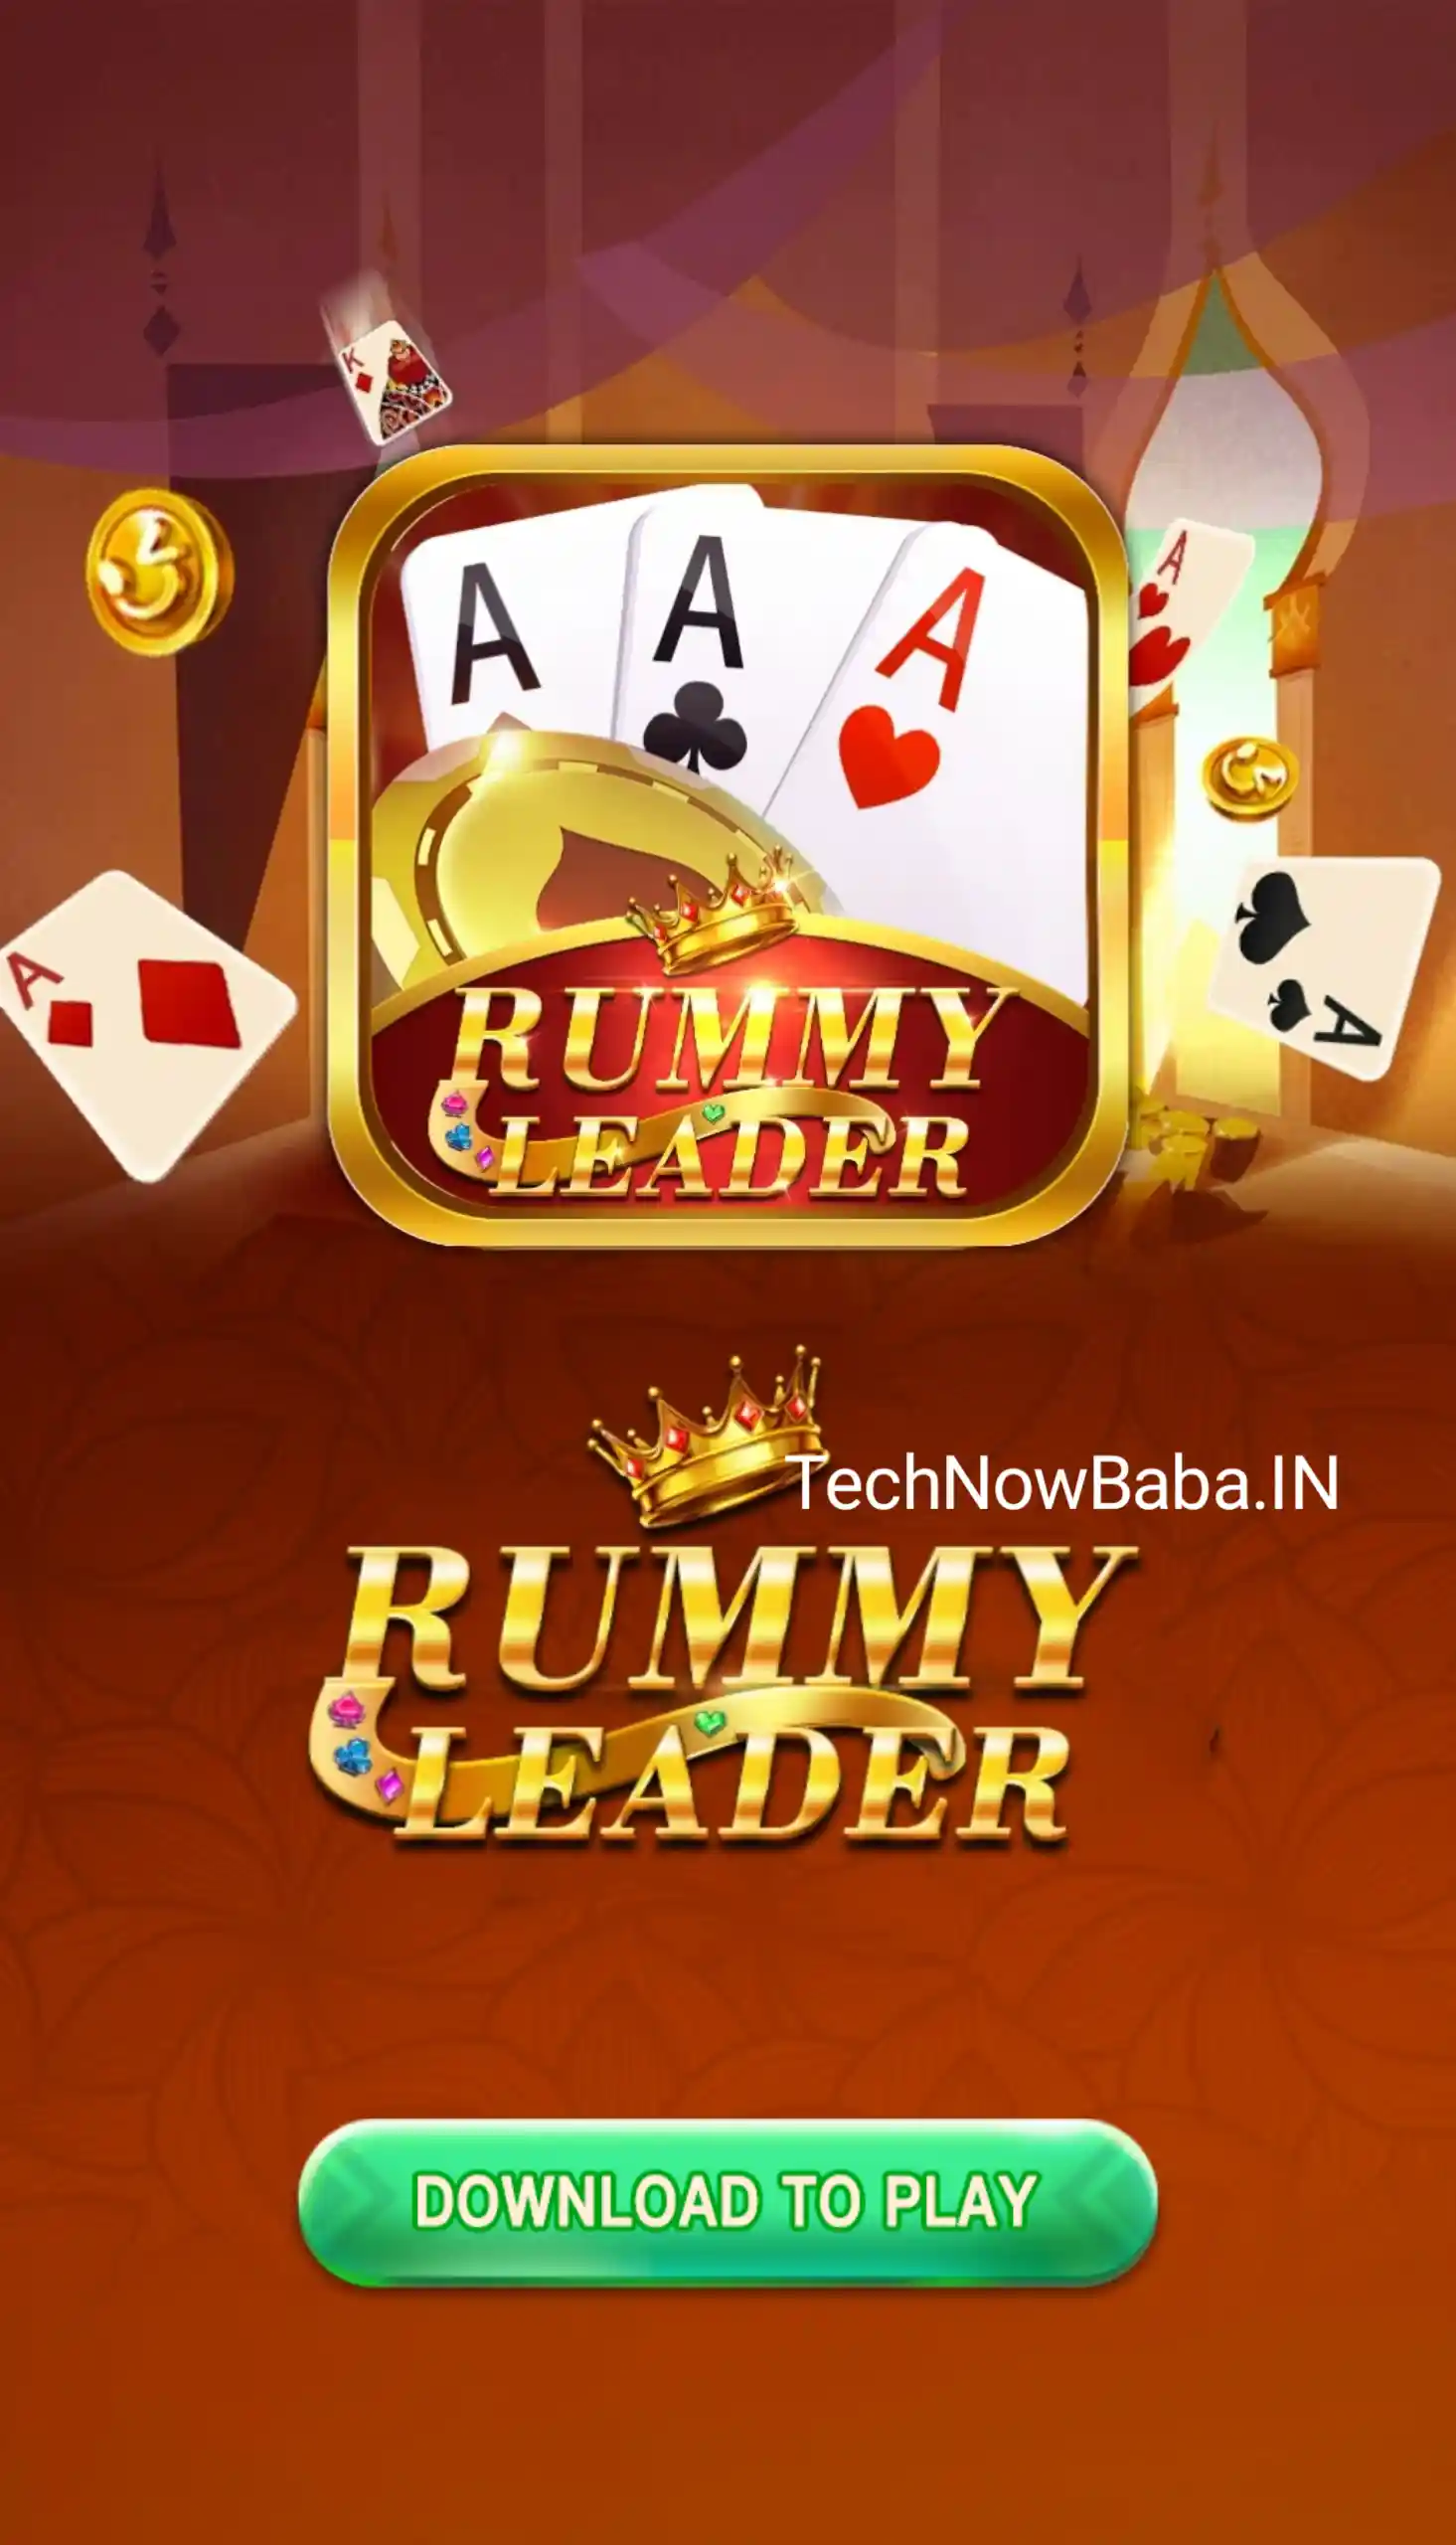 Rummy Leader App Download TechNow Baba